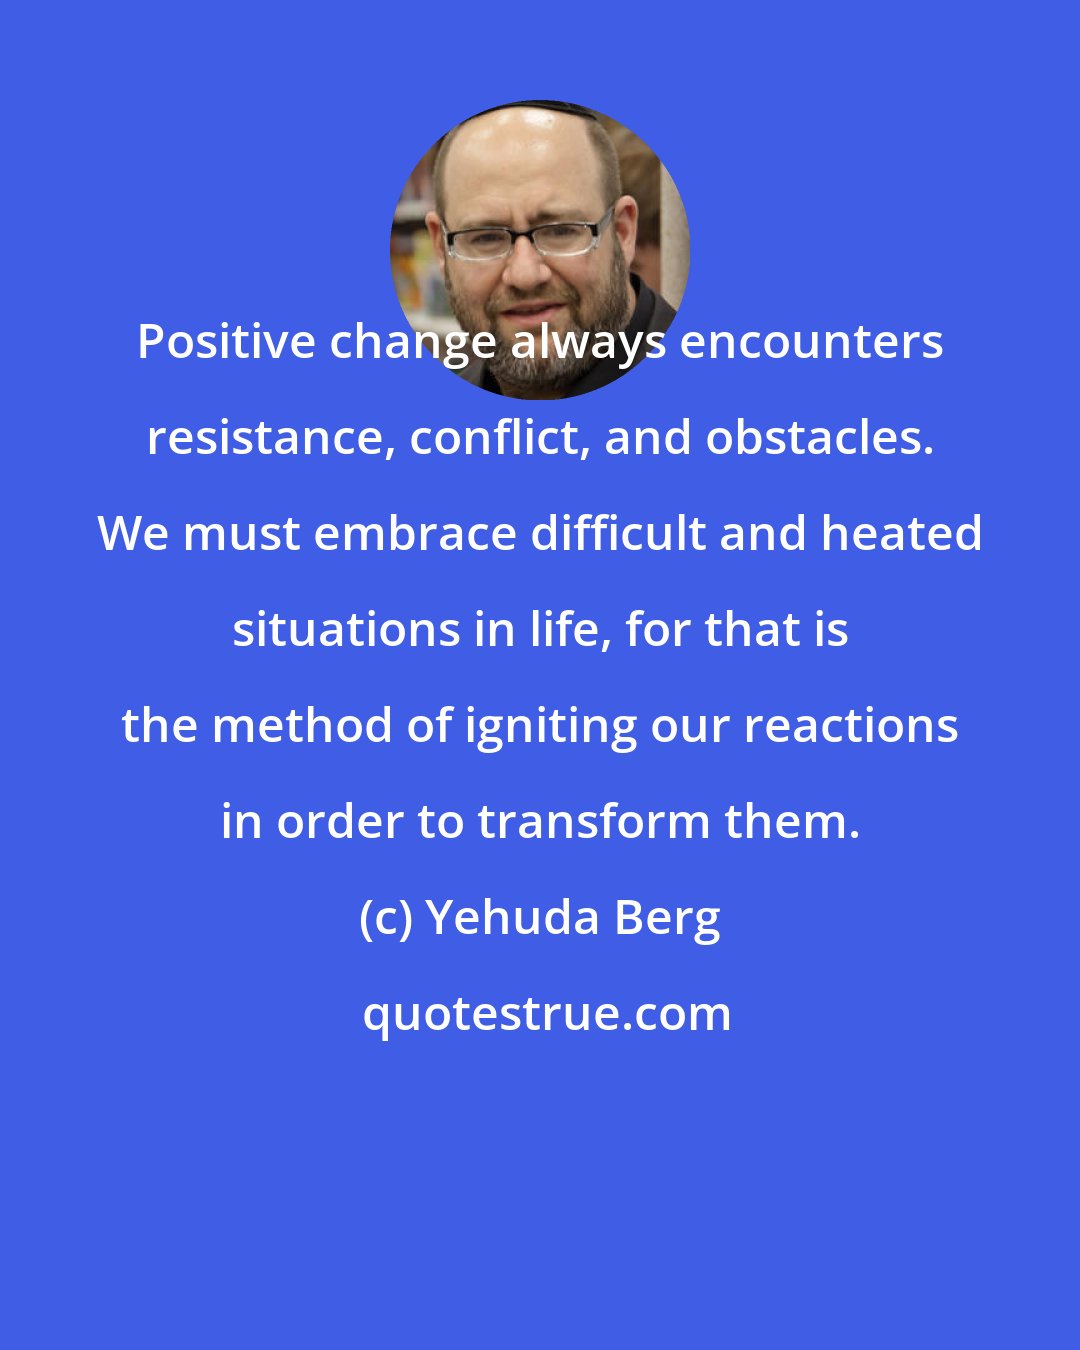 Yehuda Berg: Positive change always encounters resistance, conflict, and obstacles. We must embrace difficult and heated situations in life, for that is the method of igniting our reactions in order to transform them.